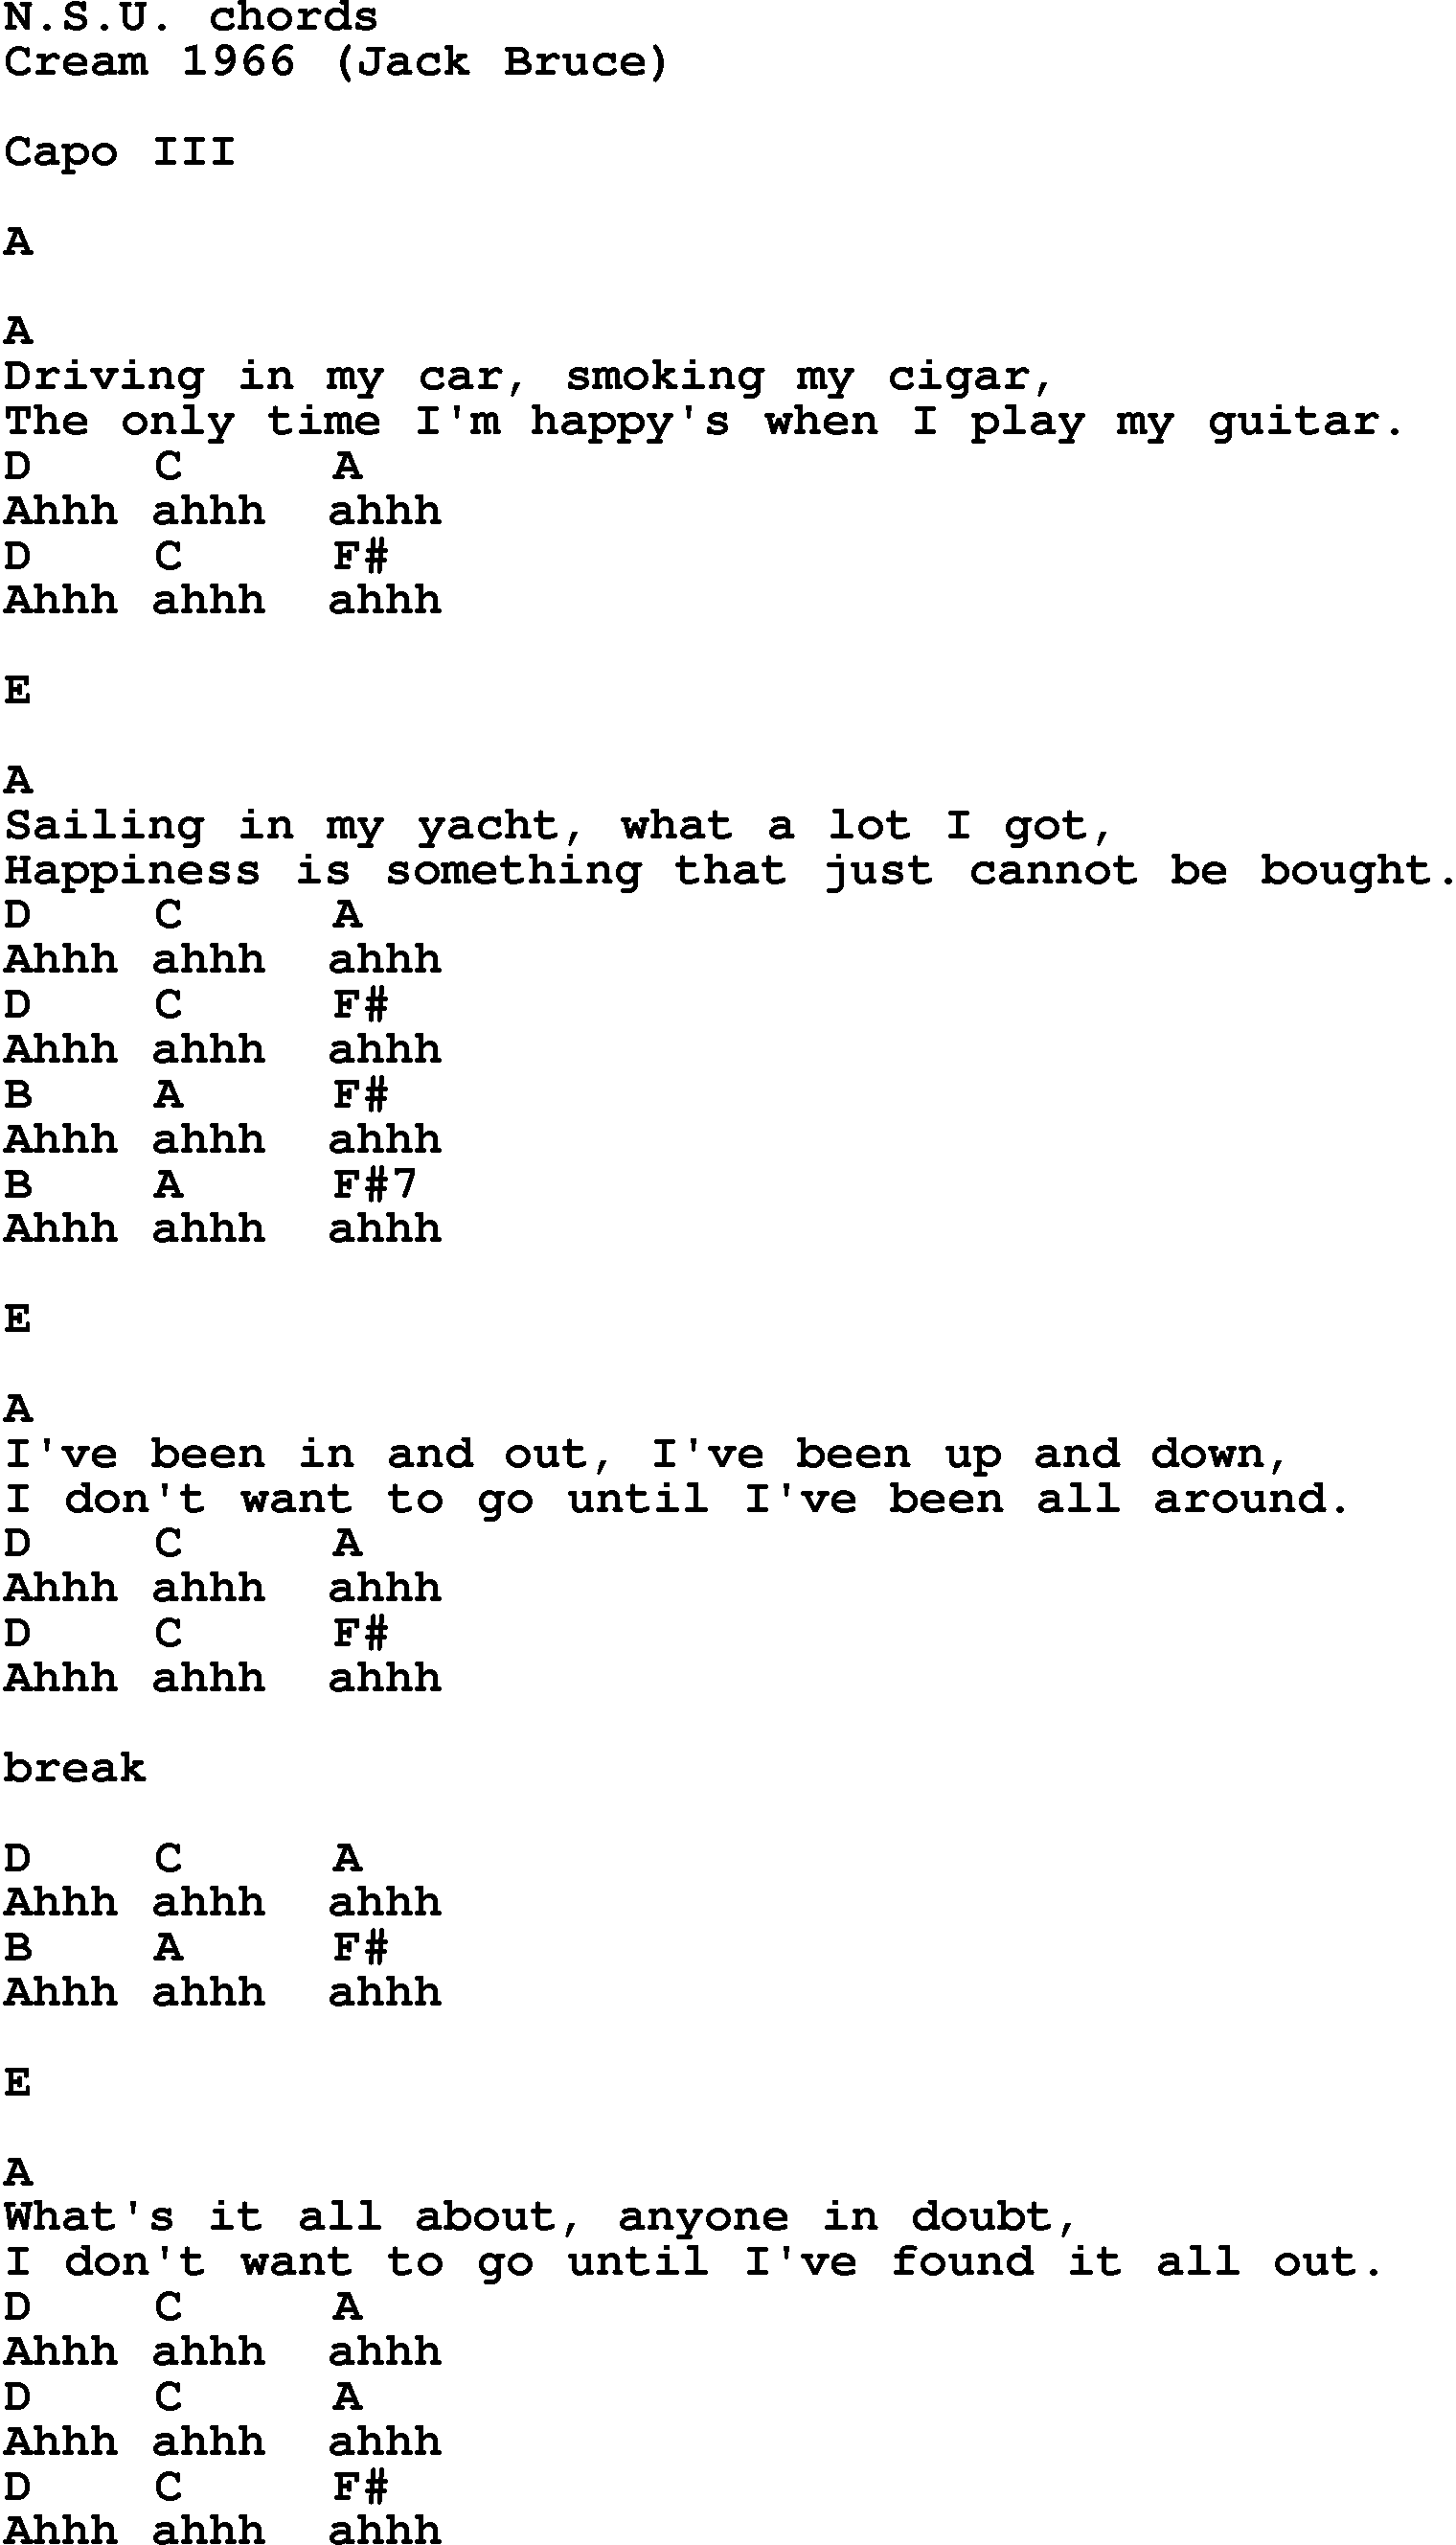 Song Lyrics with guitar chords for Nsu - Cream